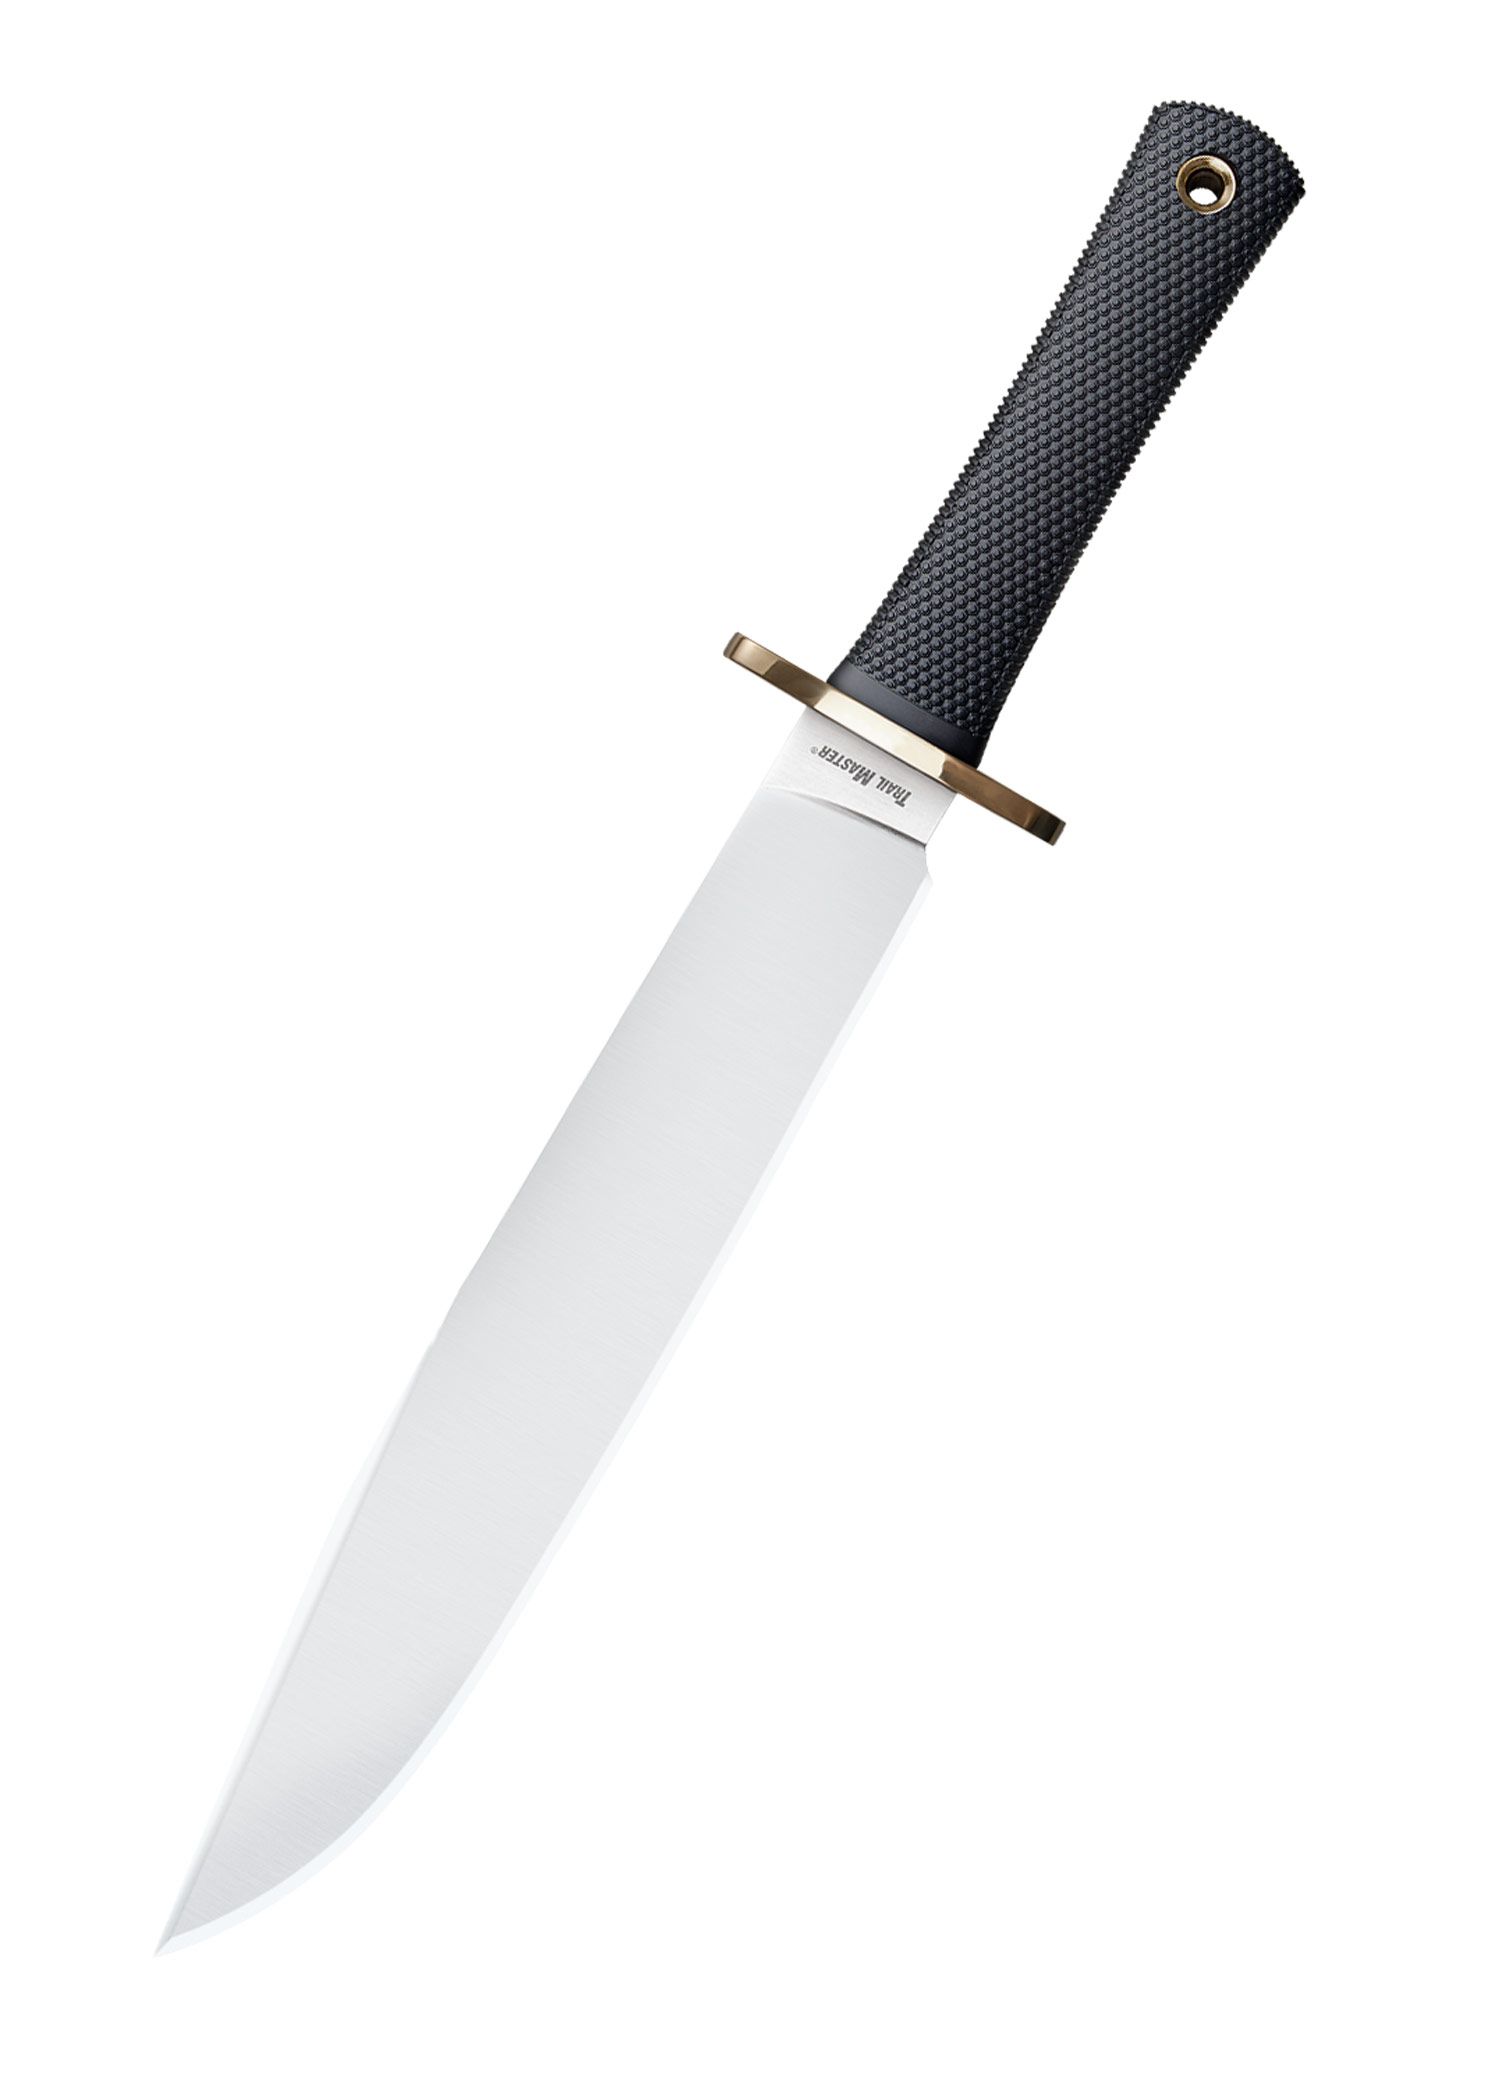 Trail Master Bowie, O-1 Stahl